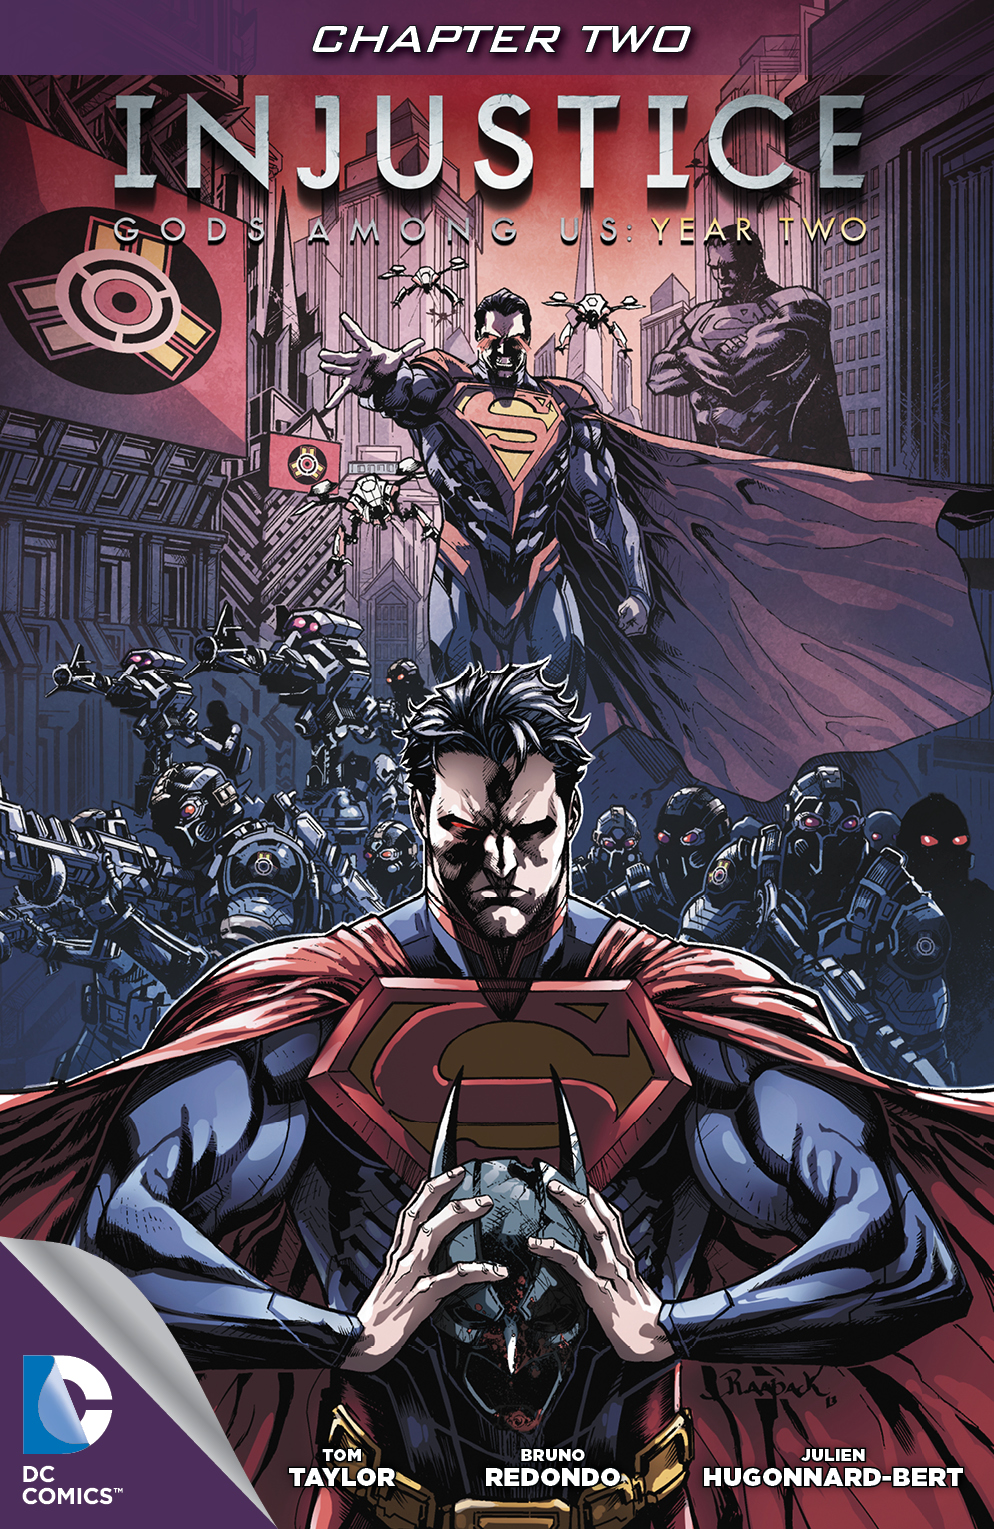 Injustice: Gods Among Us: Year Two #2 preview images